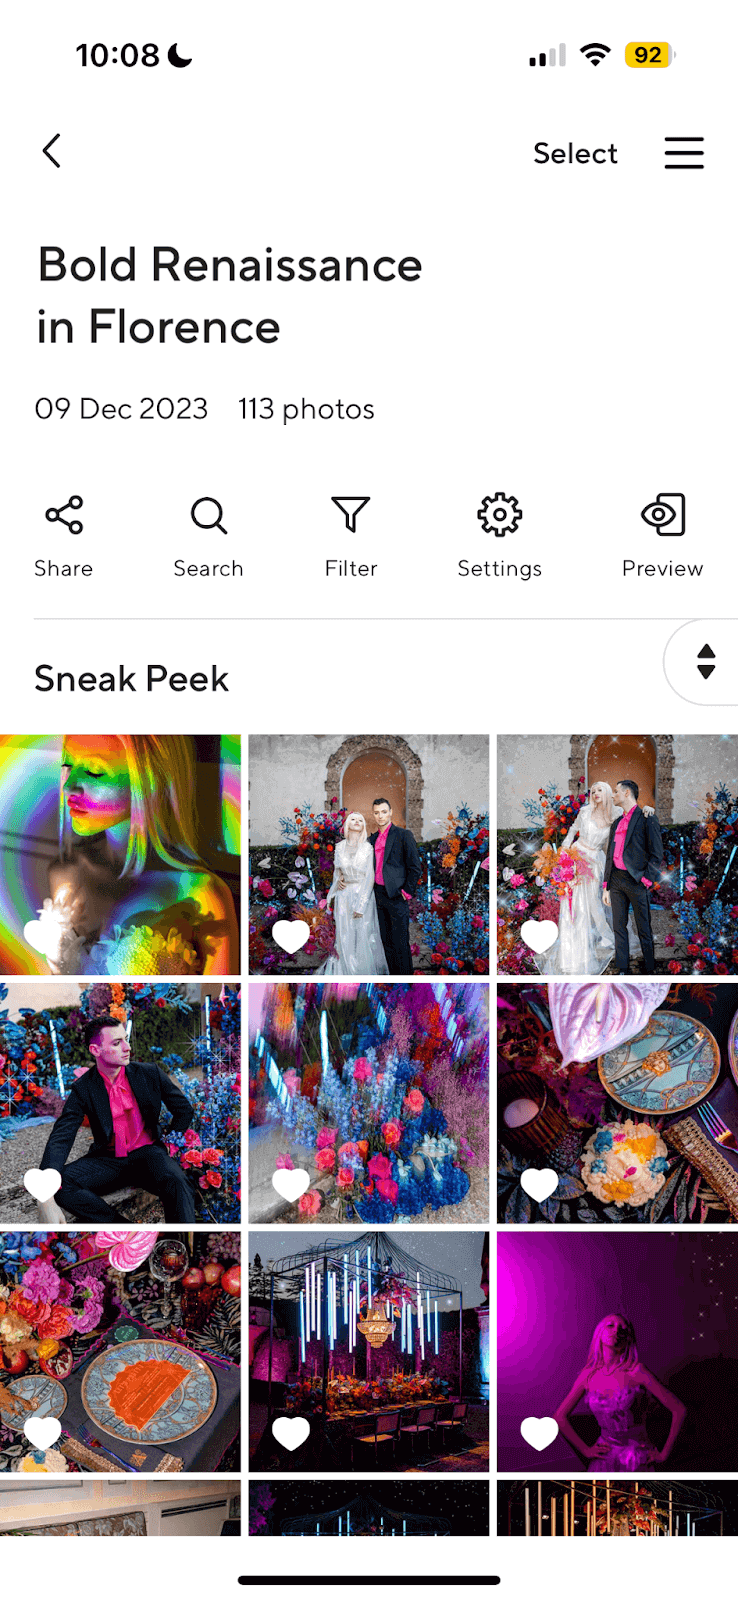 Galleries in Pic-Time on mobile view